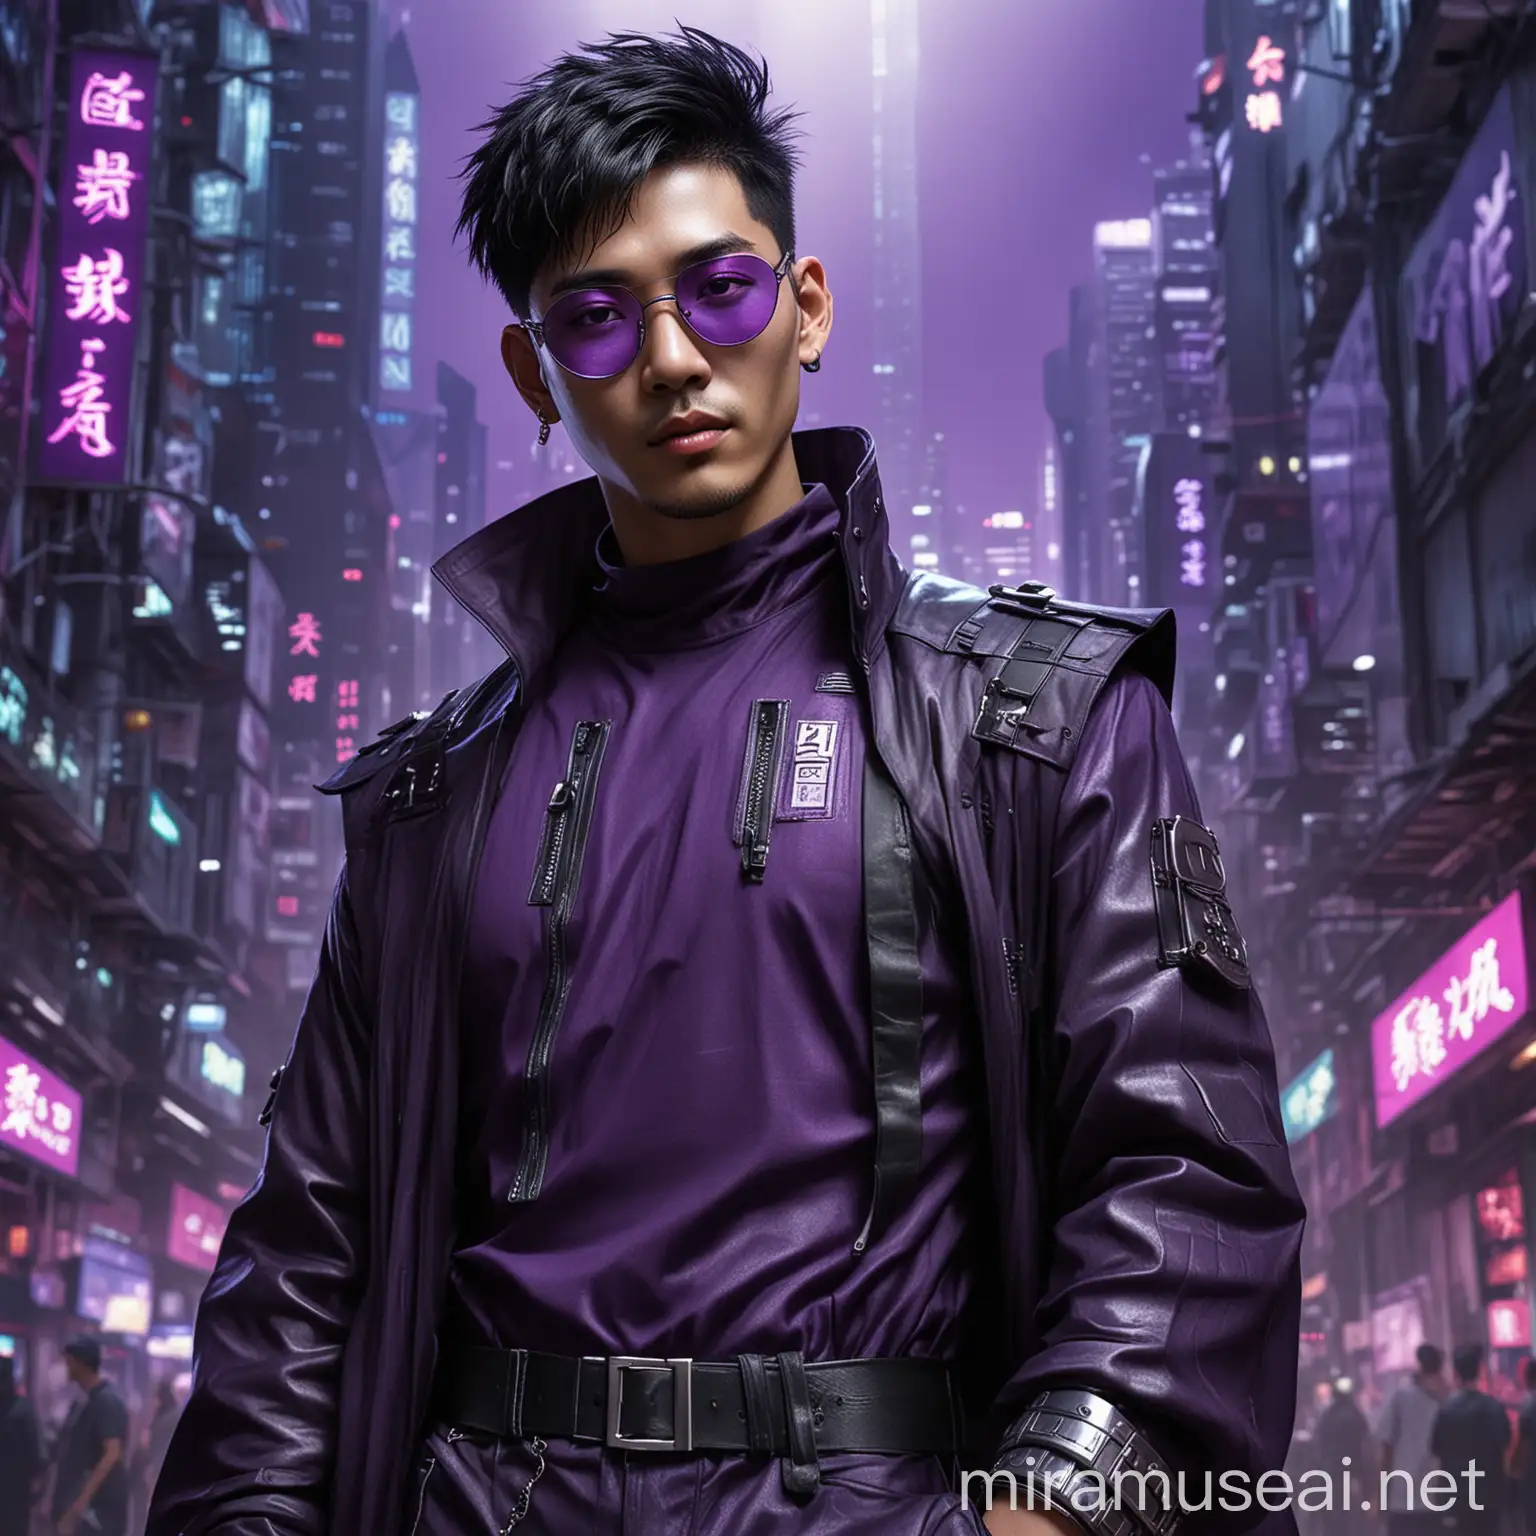 purple themed cyberpunk hong kong men, tall, with round silver glasses, slightly curly short black hair, with the clothes on, add a bit hong kong elements as background